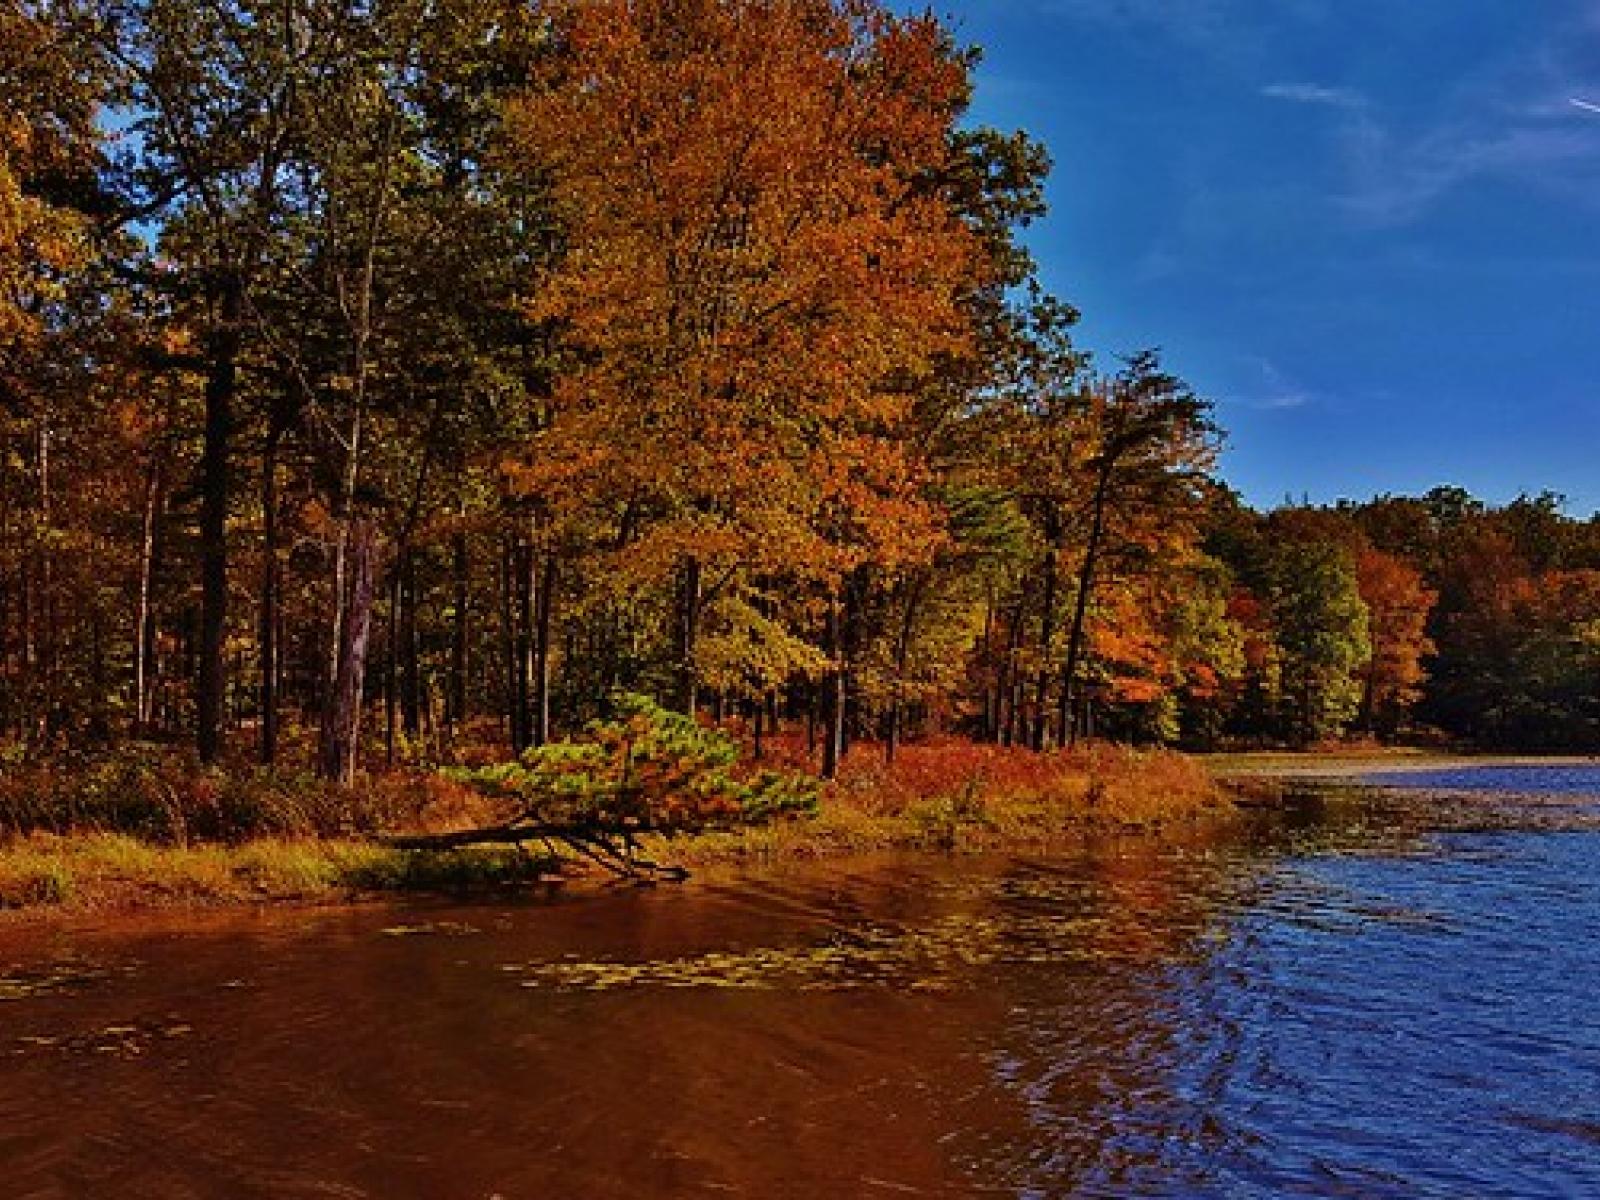 lakeside forest in the fall with orange and red trees